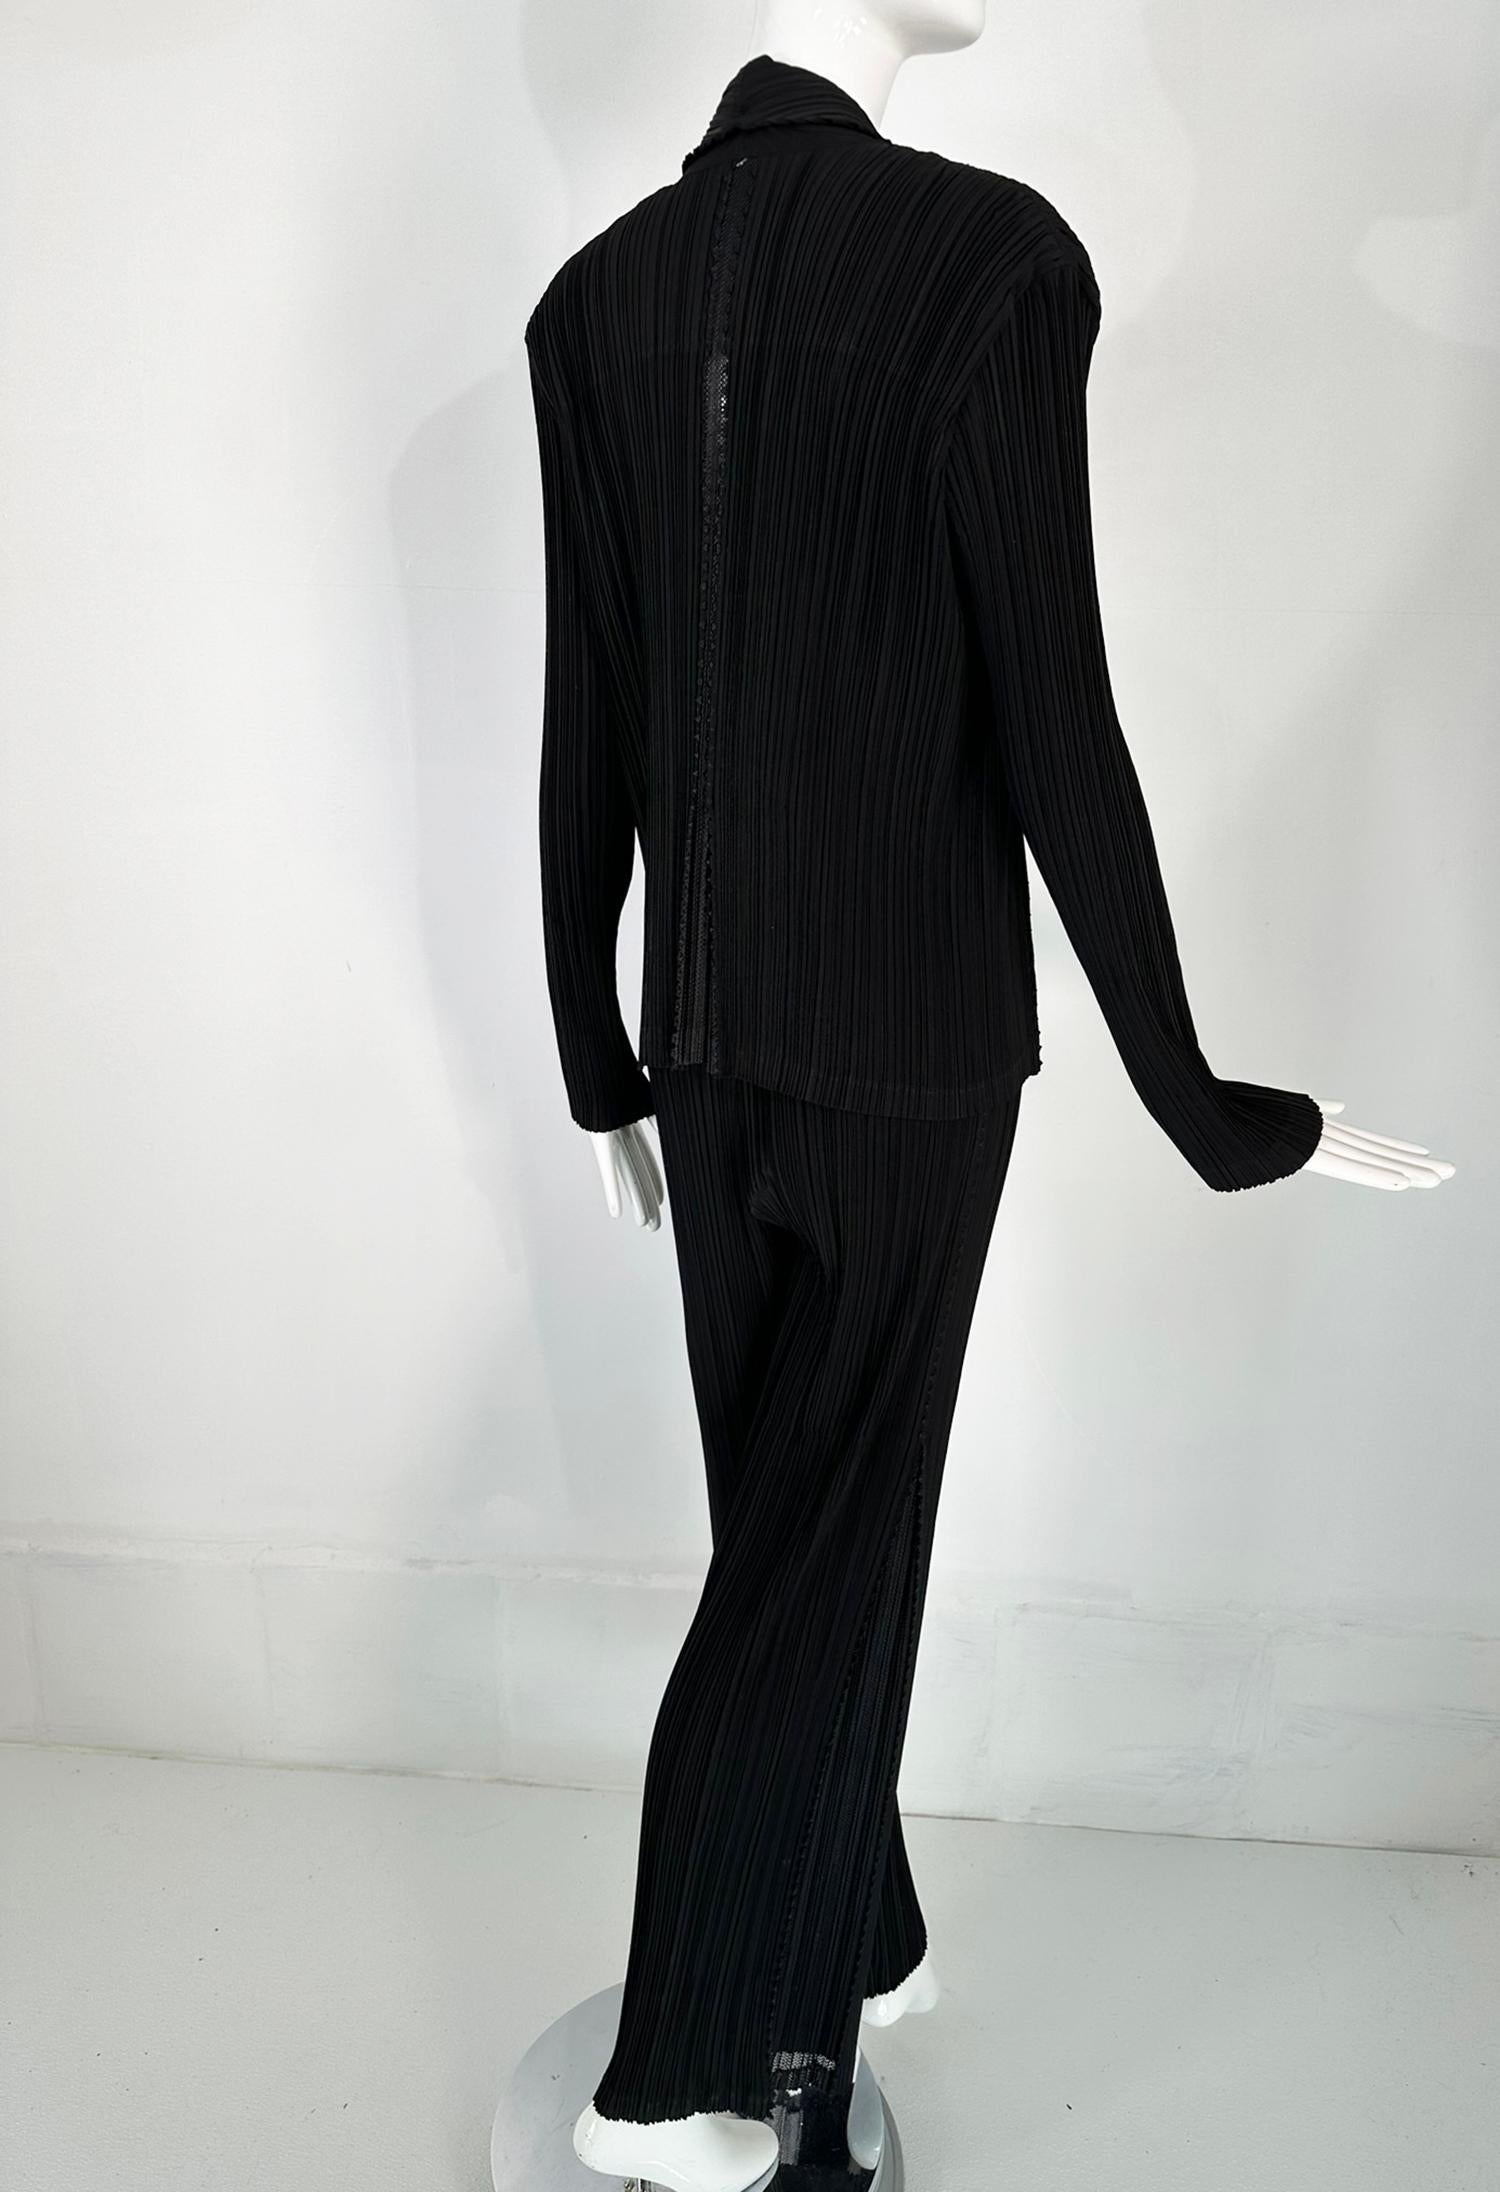 Issey Miyake Fete 2pc Jacket & Pant Black Pleats with Open Mesh Insertion Size 4 For Sale 2